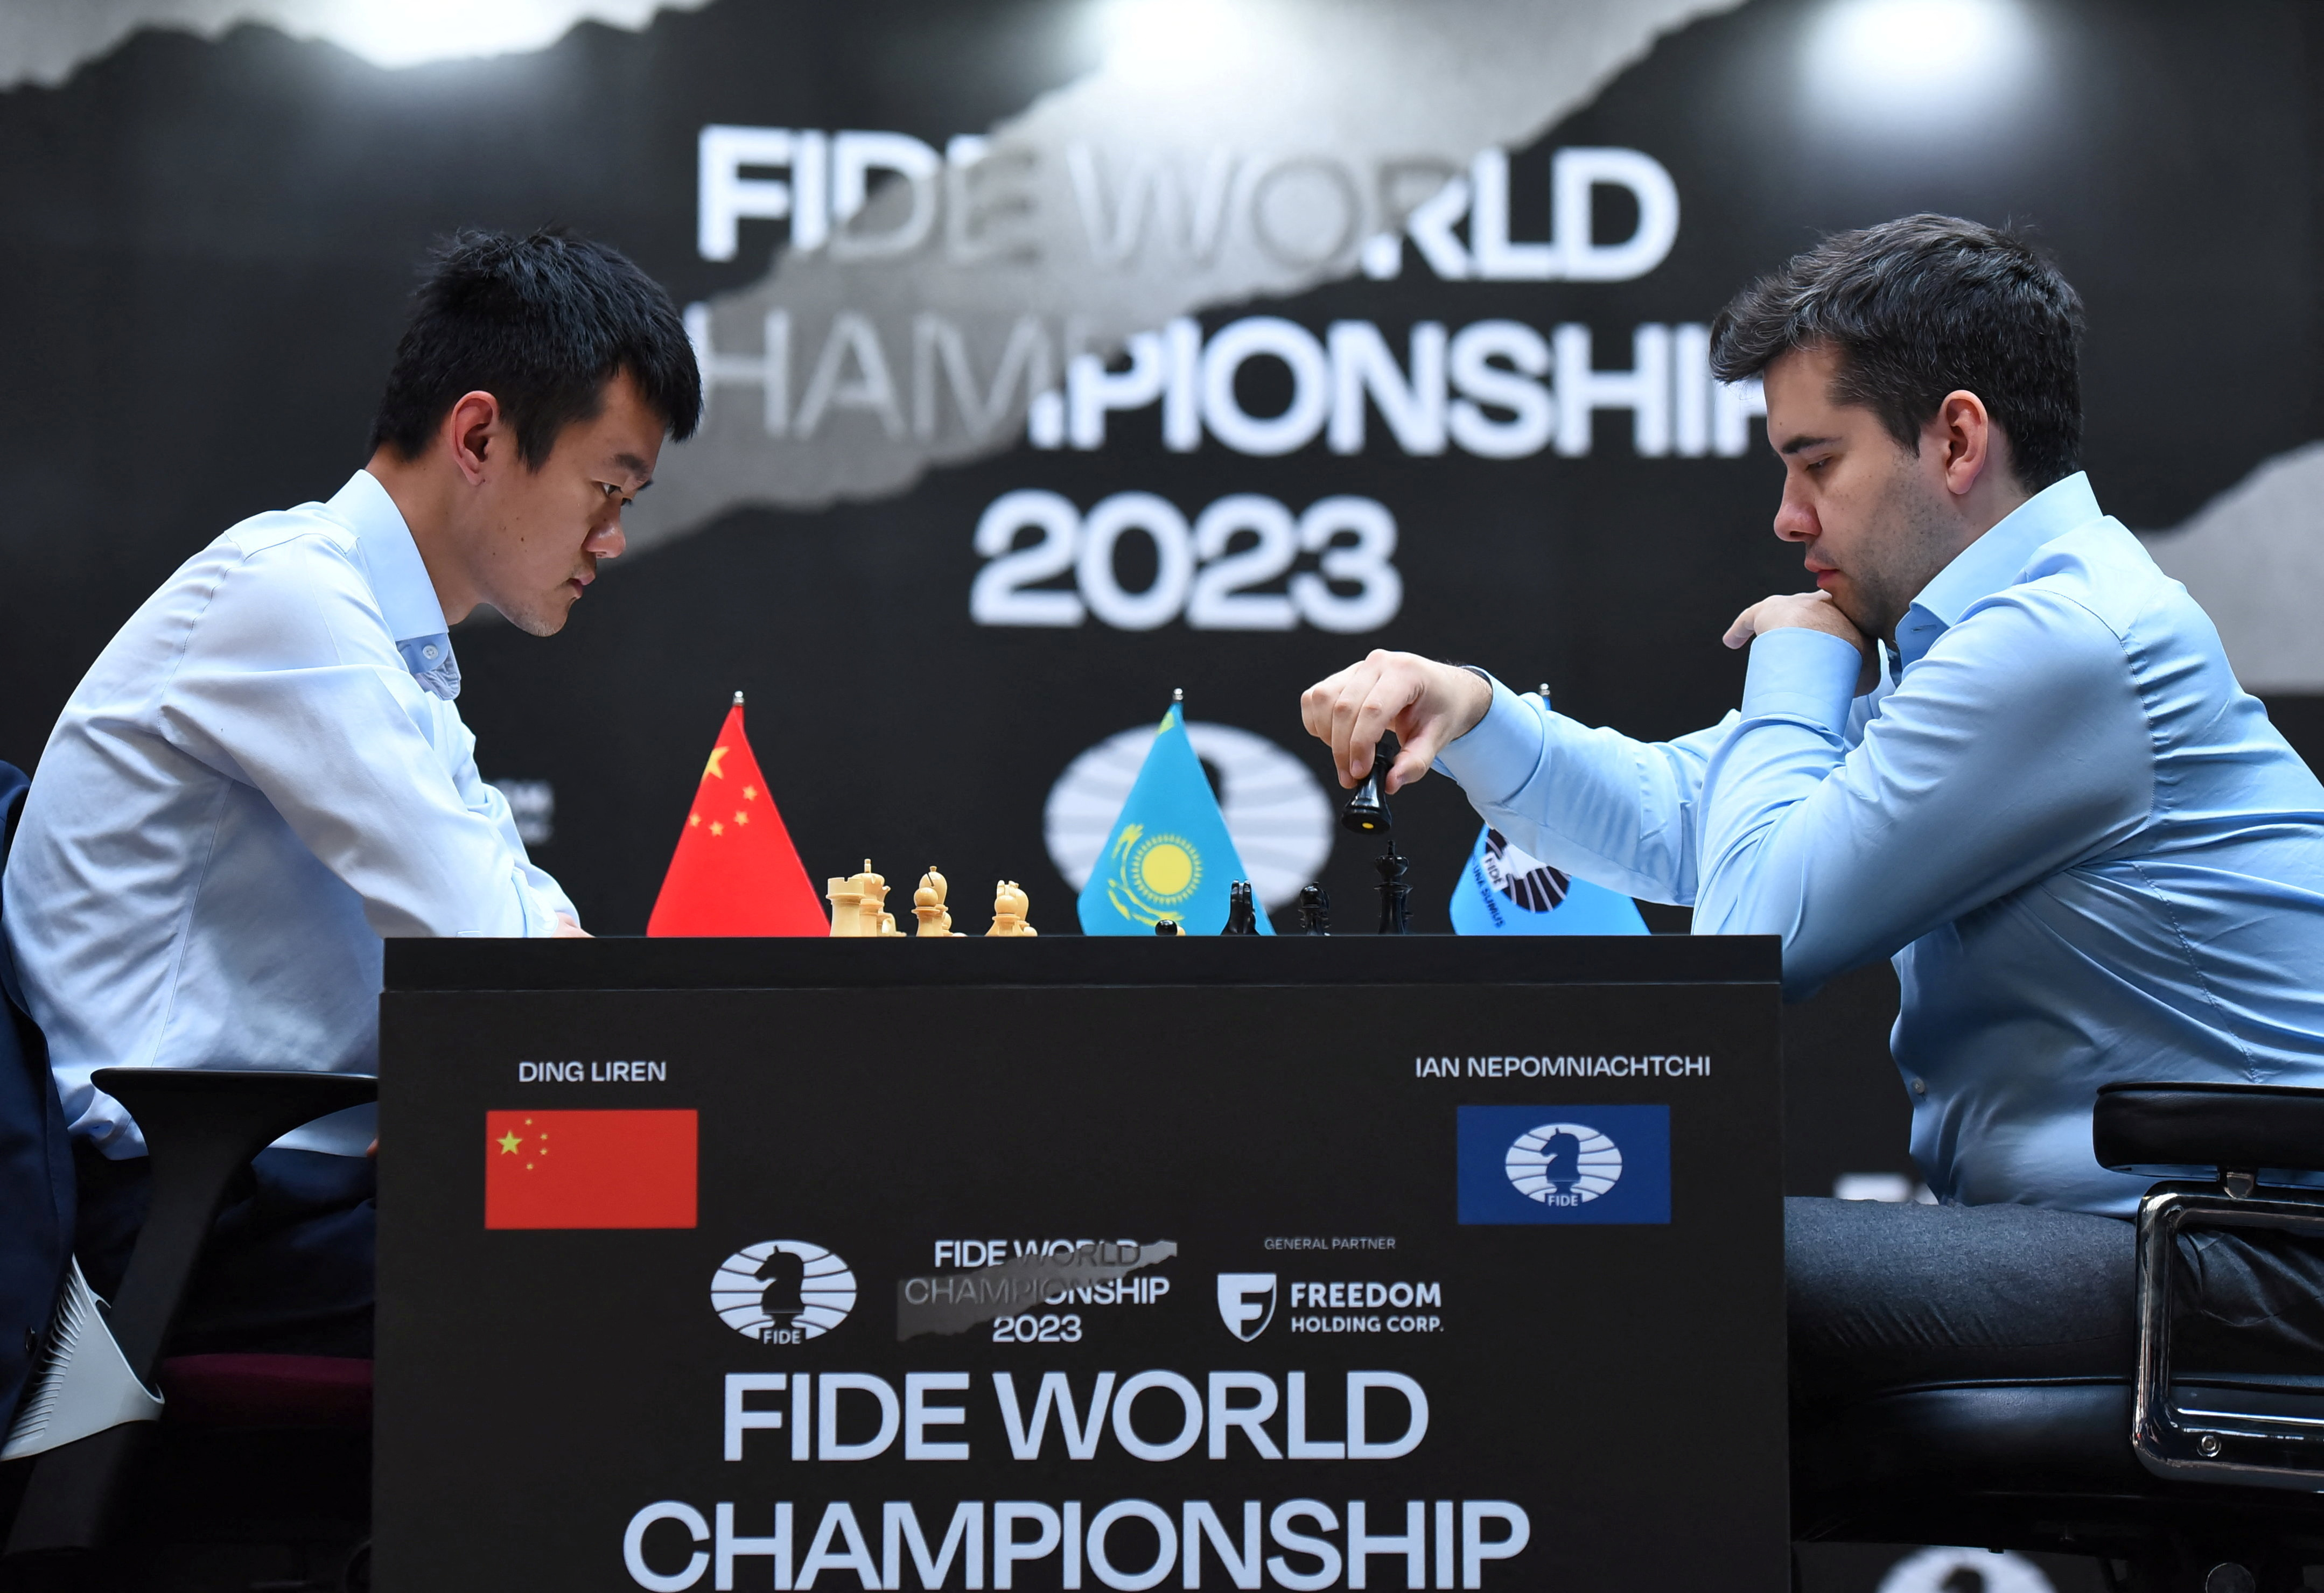 Ding Liren Becomes World Chess Champion with Courageous Moves in